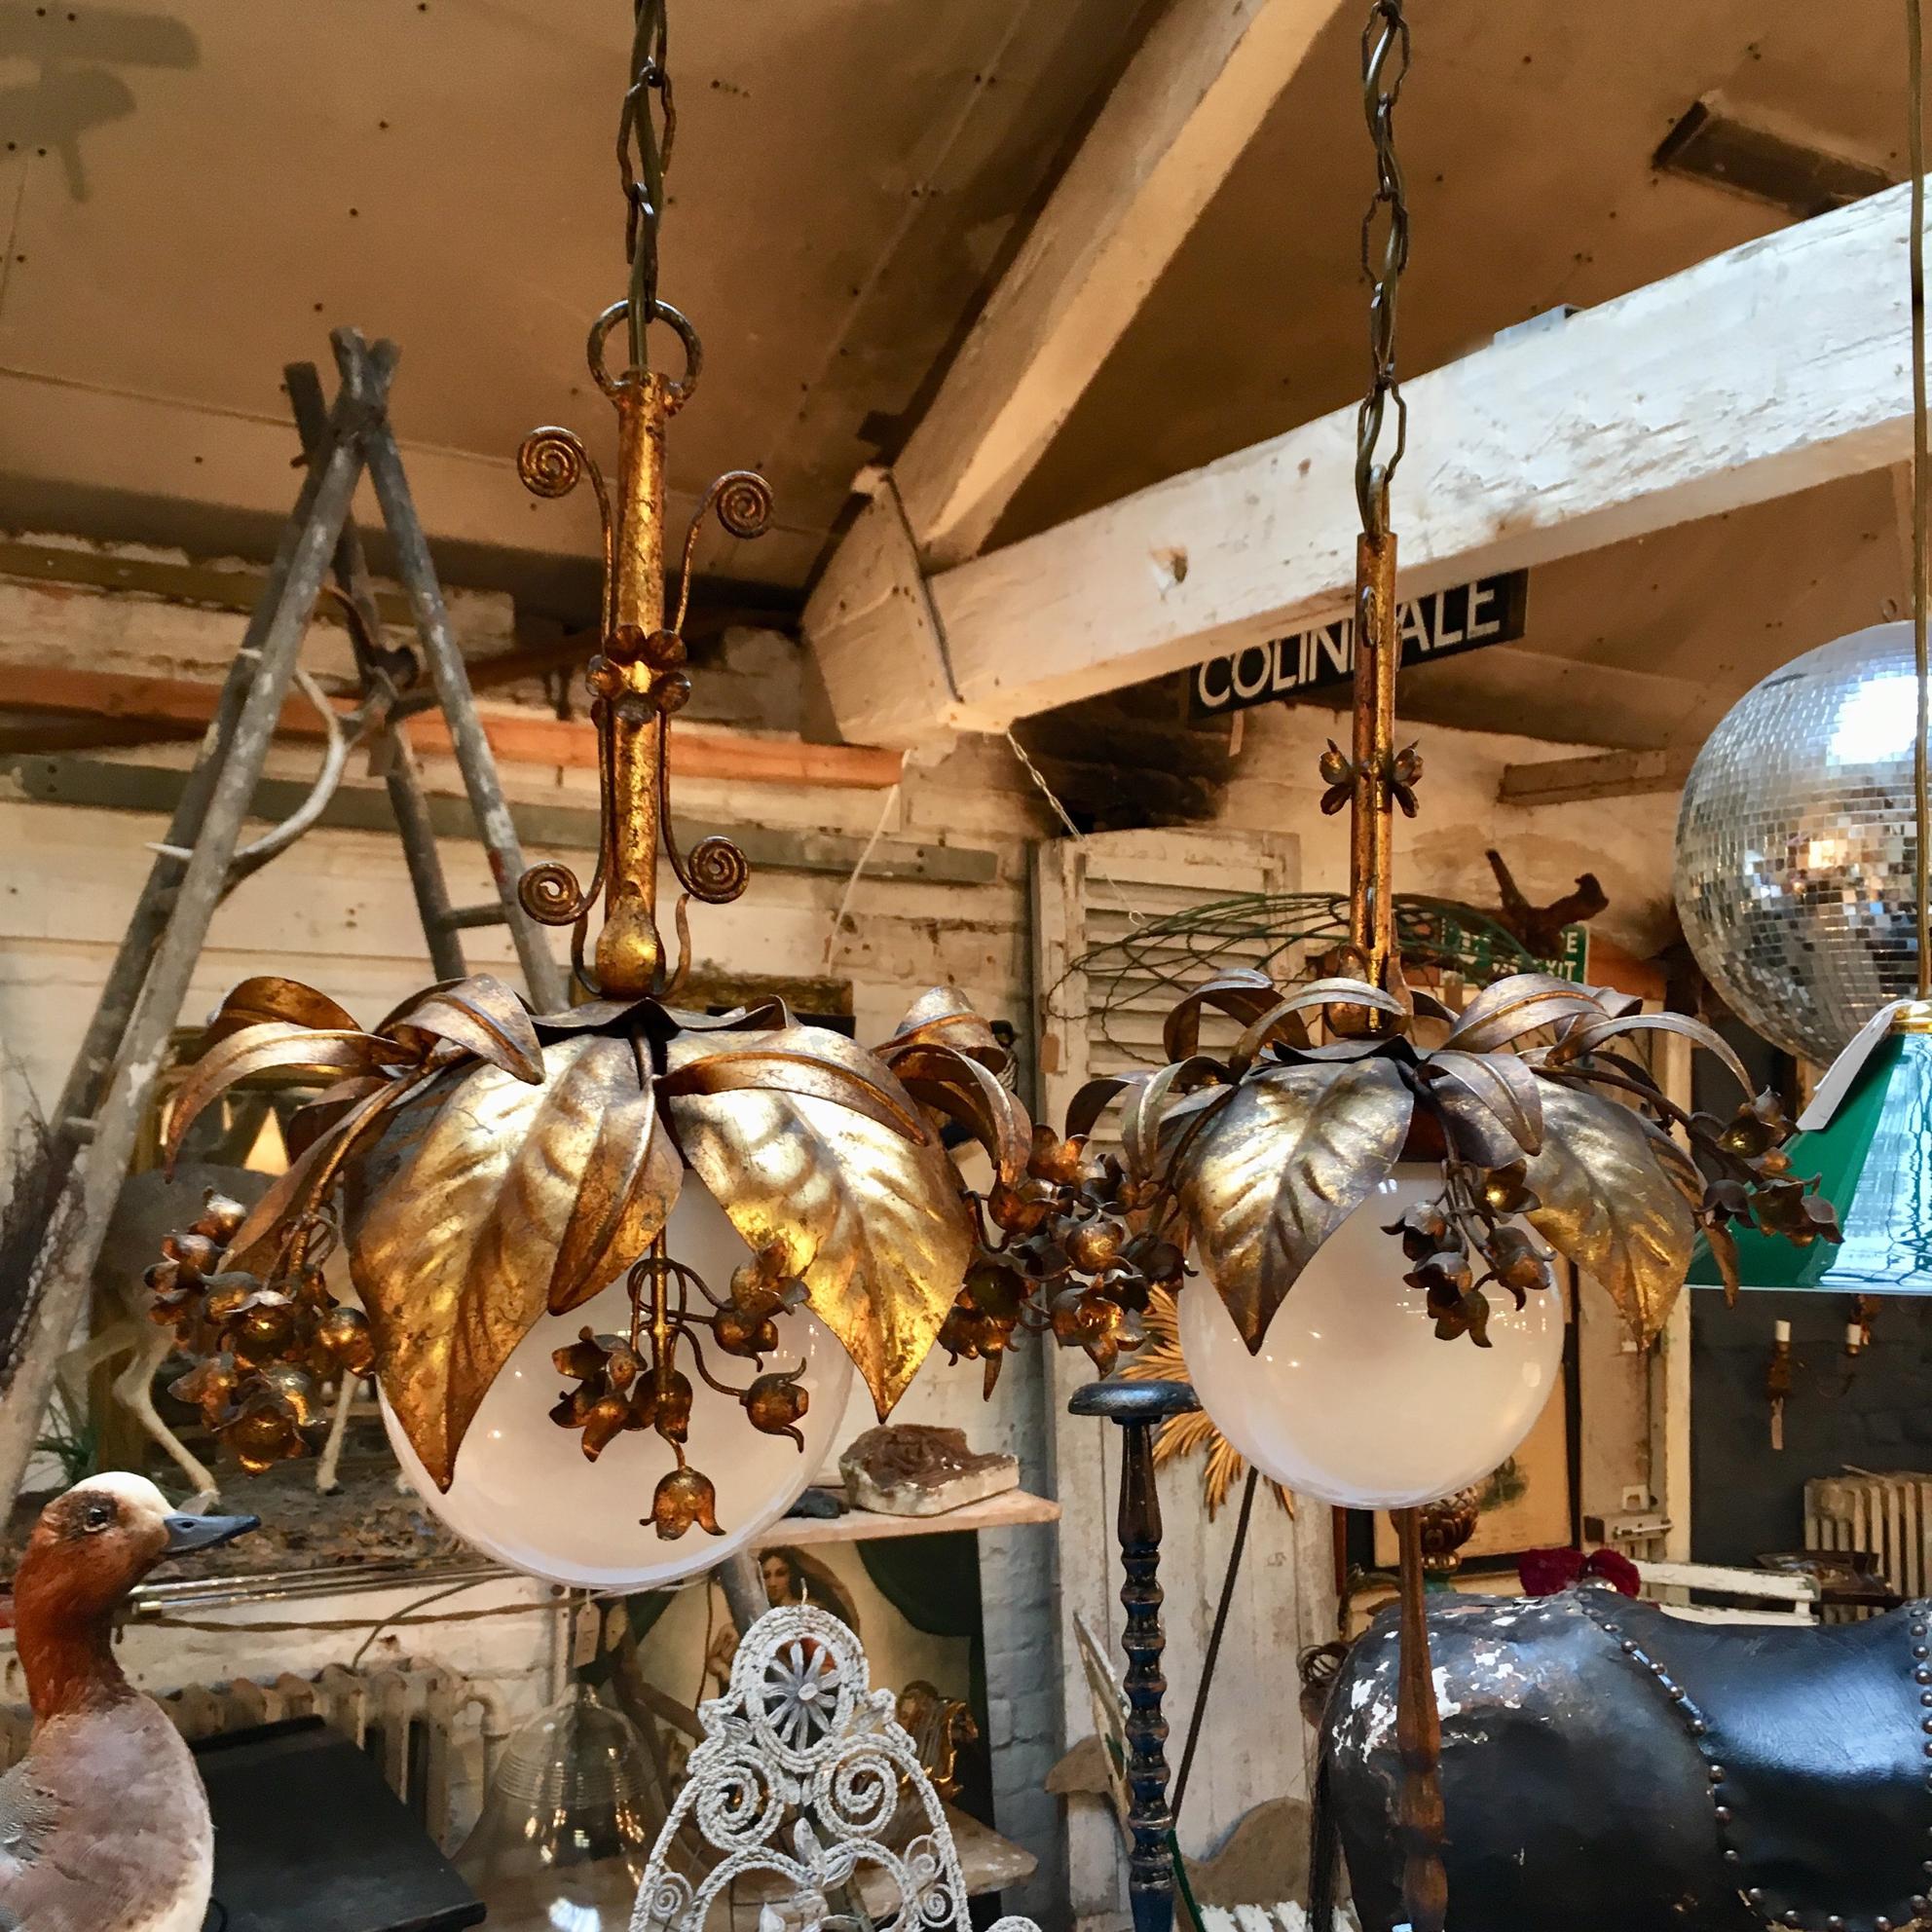 Beautiful pair of Banci Firenze hanging globe pendant lights,

Italy,

1950s

Gilt leaves and flowers surround a 15 cm milk glass globe

Twisted decorative details form the stem along with more flowers

The lights hang from long chains